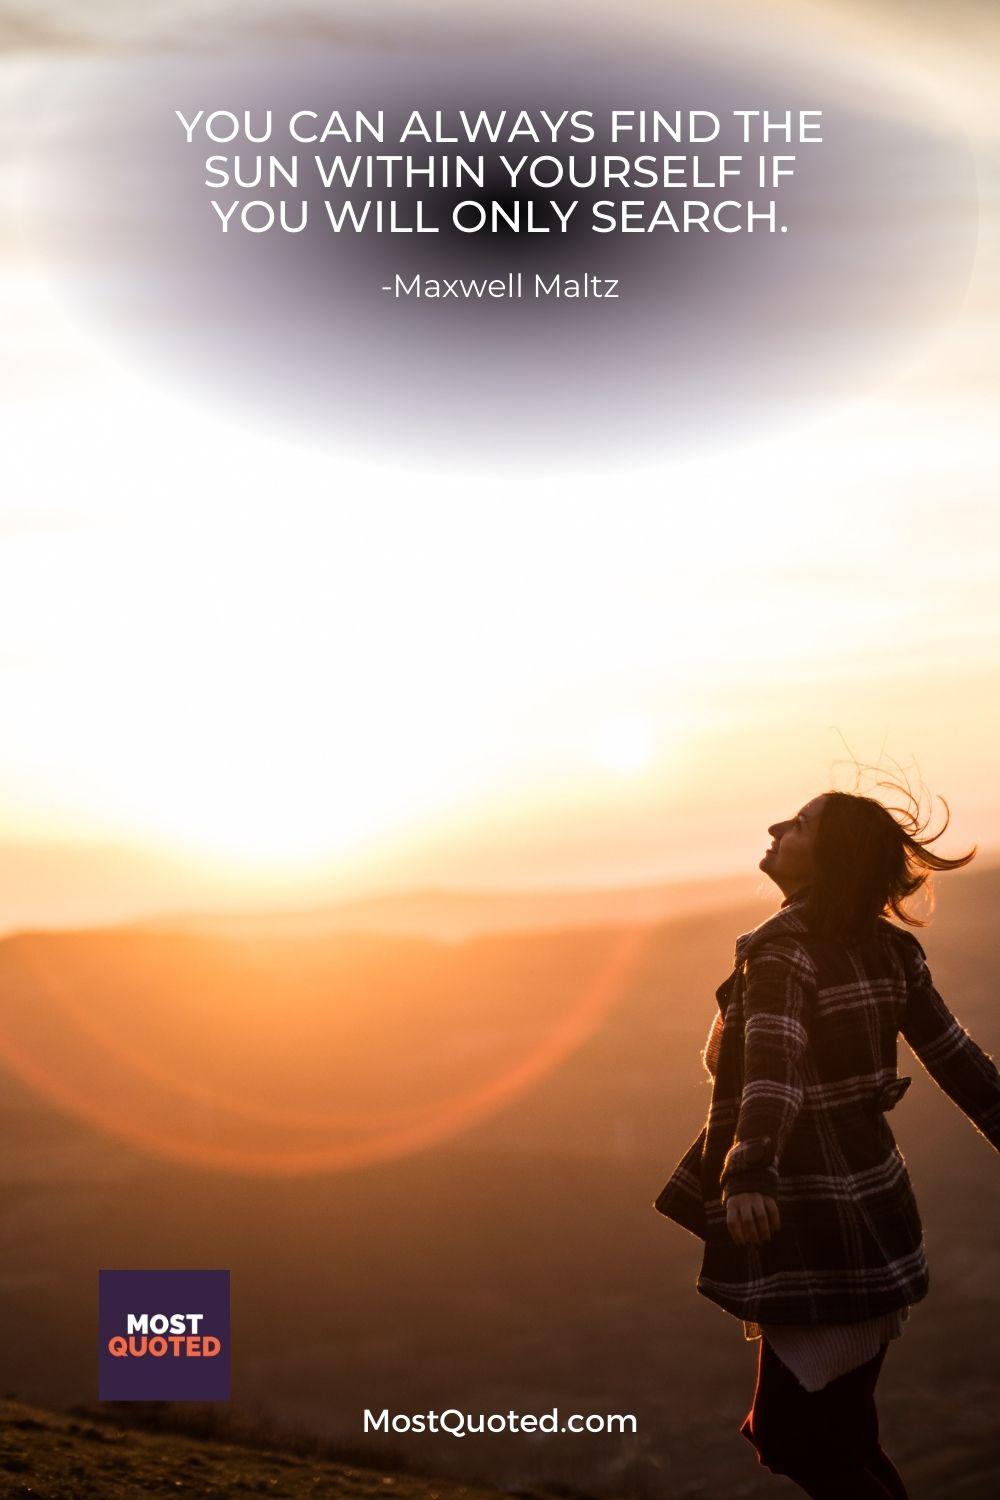 You can always find the sun within yourself if you will only search. - Maxwell Maltz